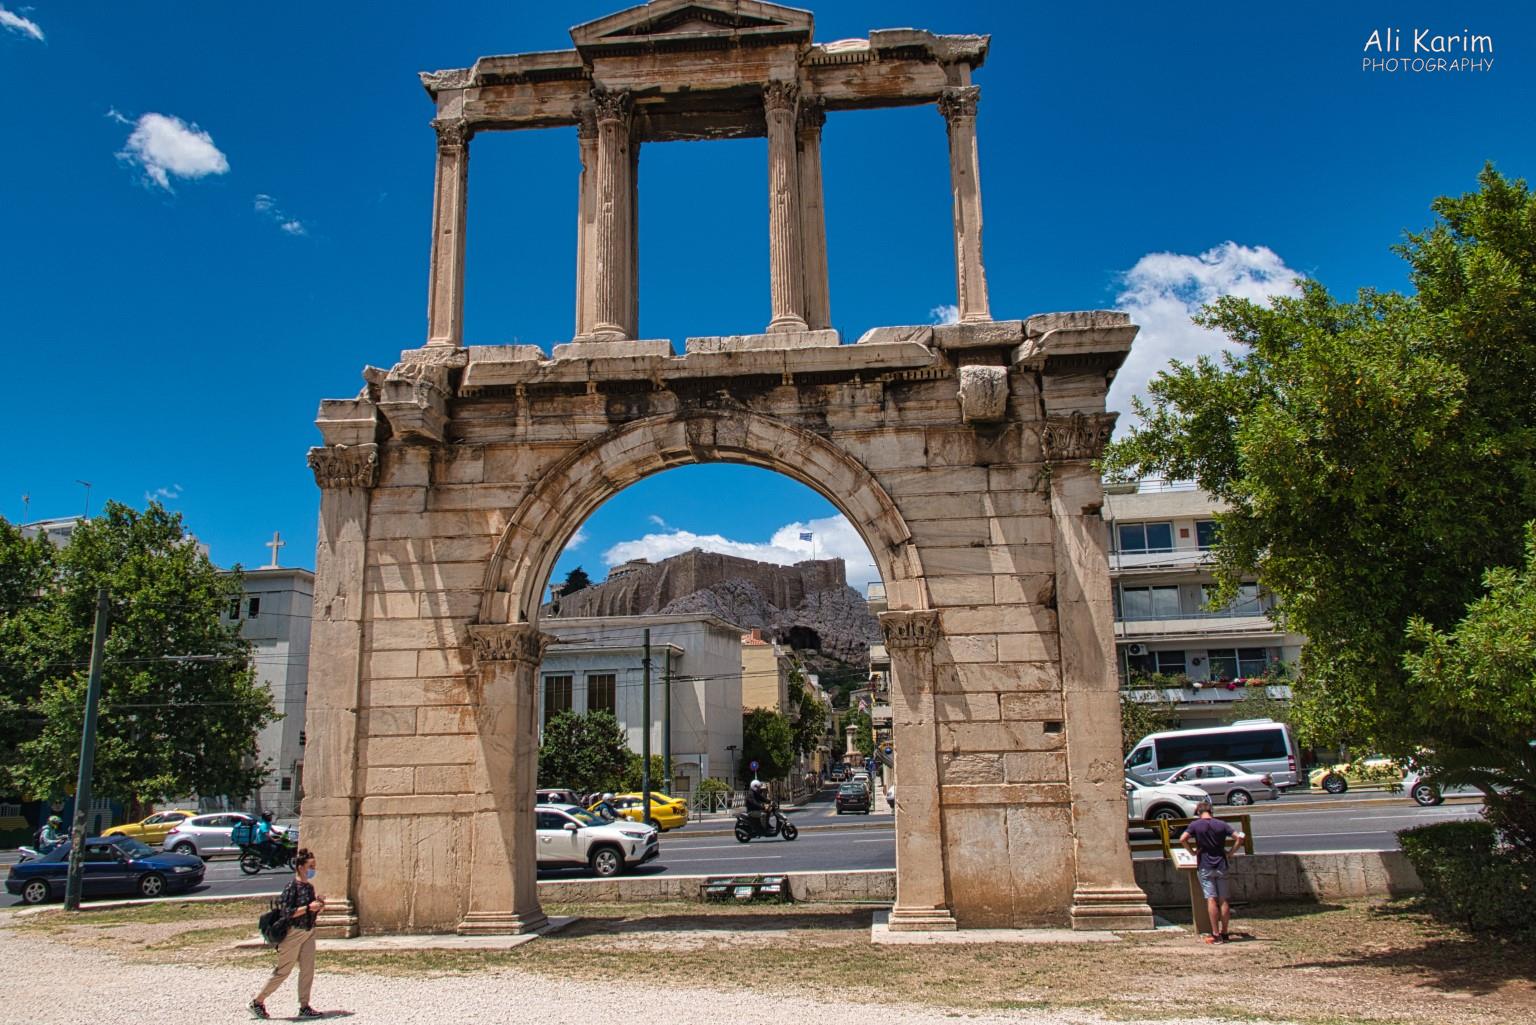 More Athens, Greece, May 2021, You are never far from a site of ruins anywhere in downtown Athens. Note the Acropolis and Parthenon view in the background under the arch